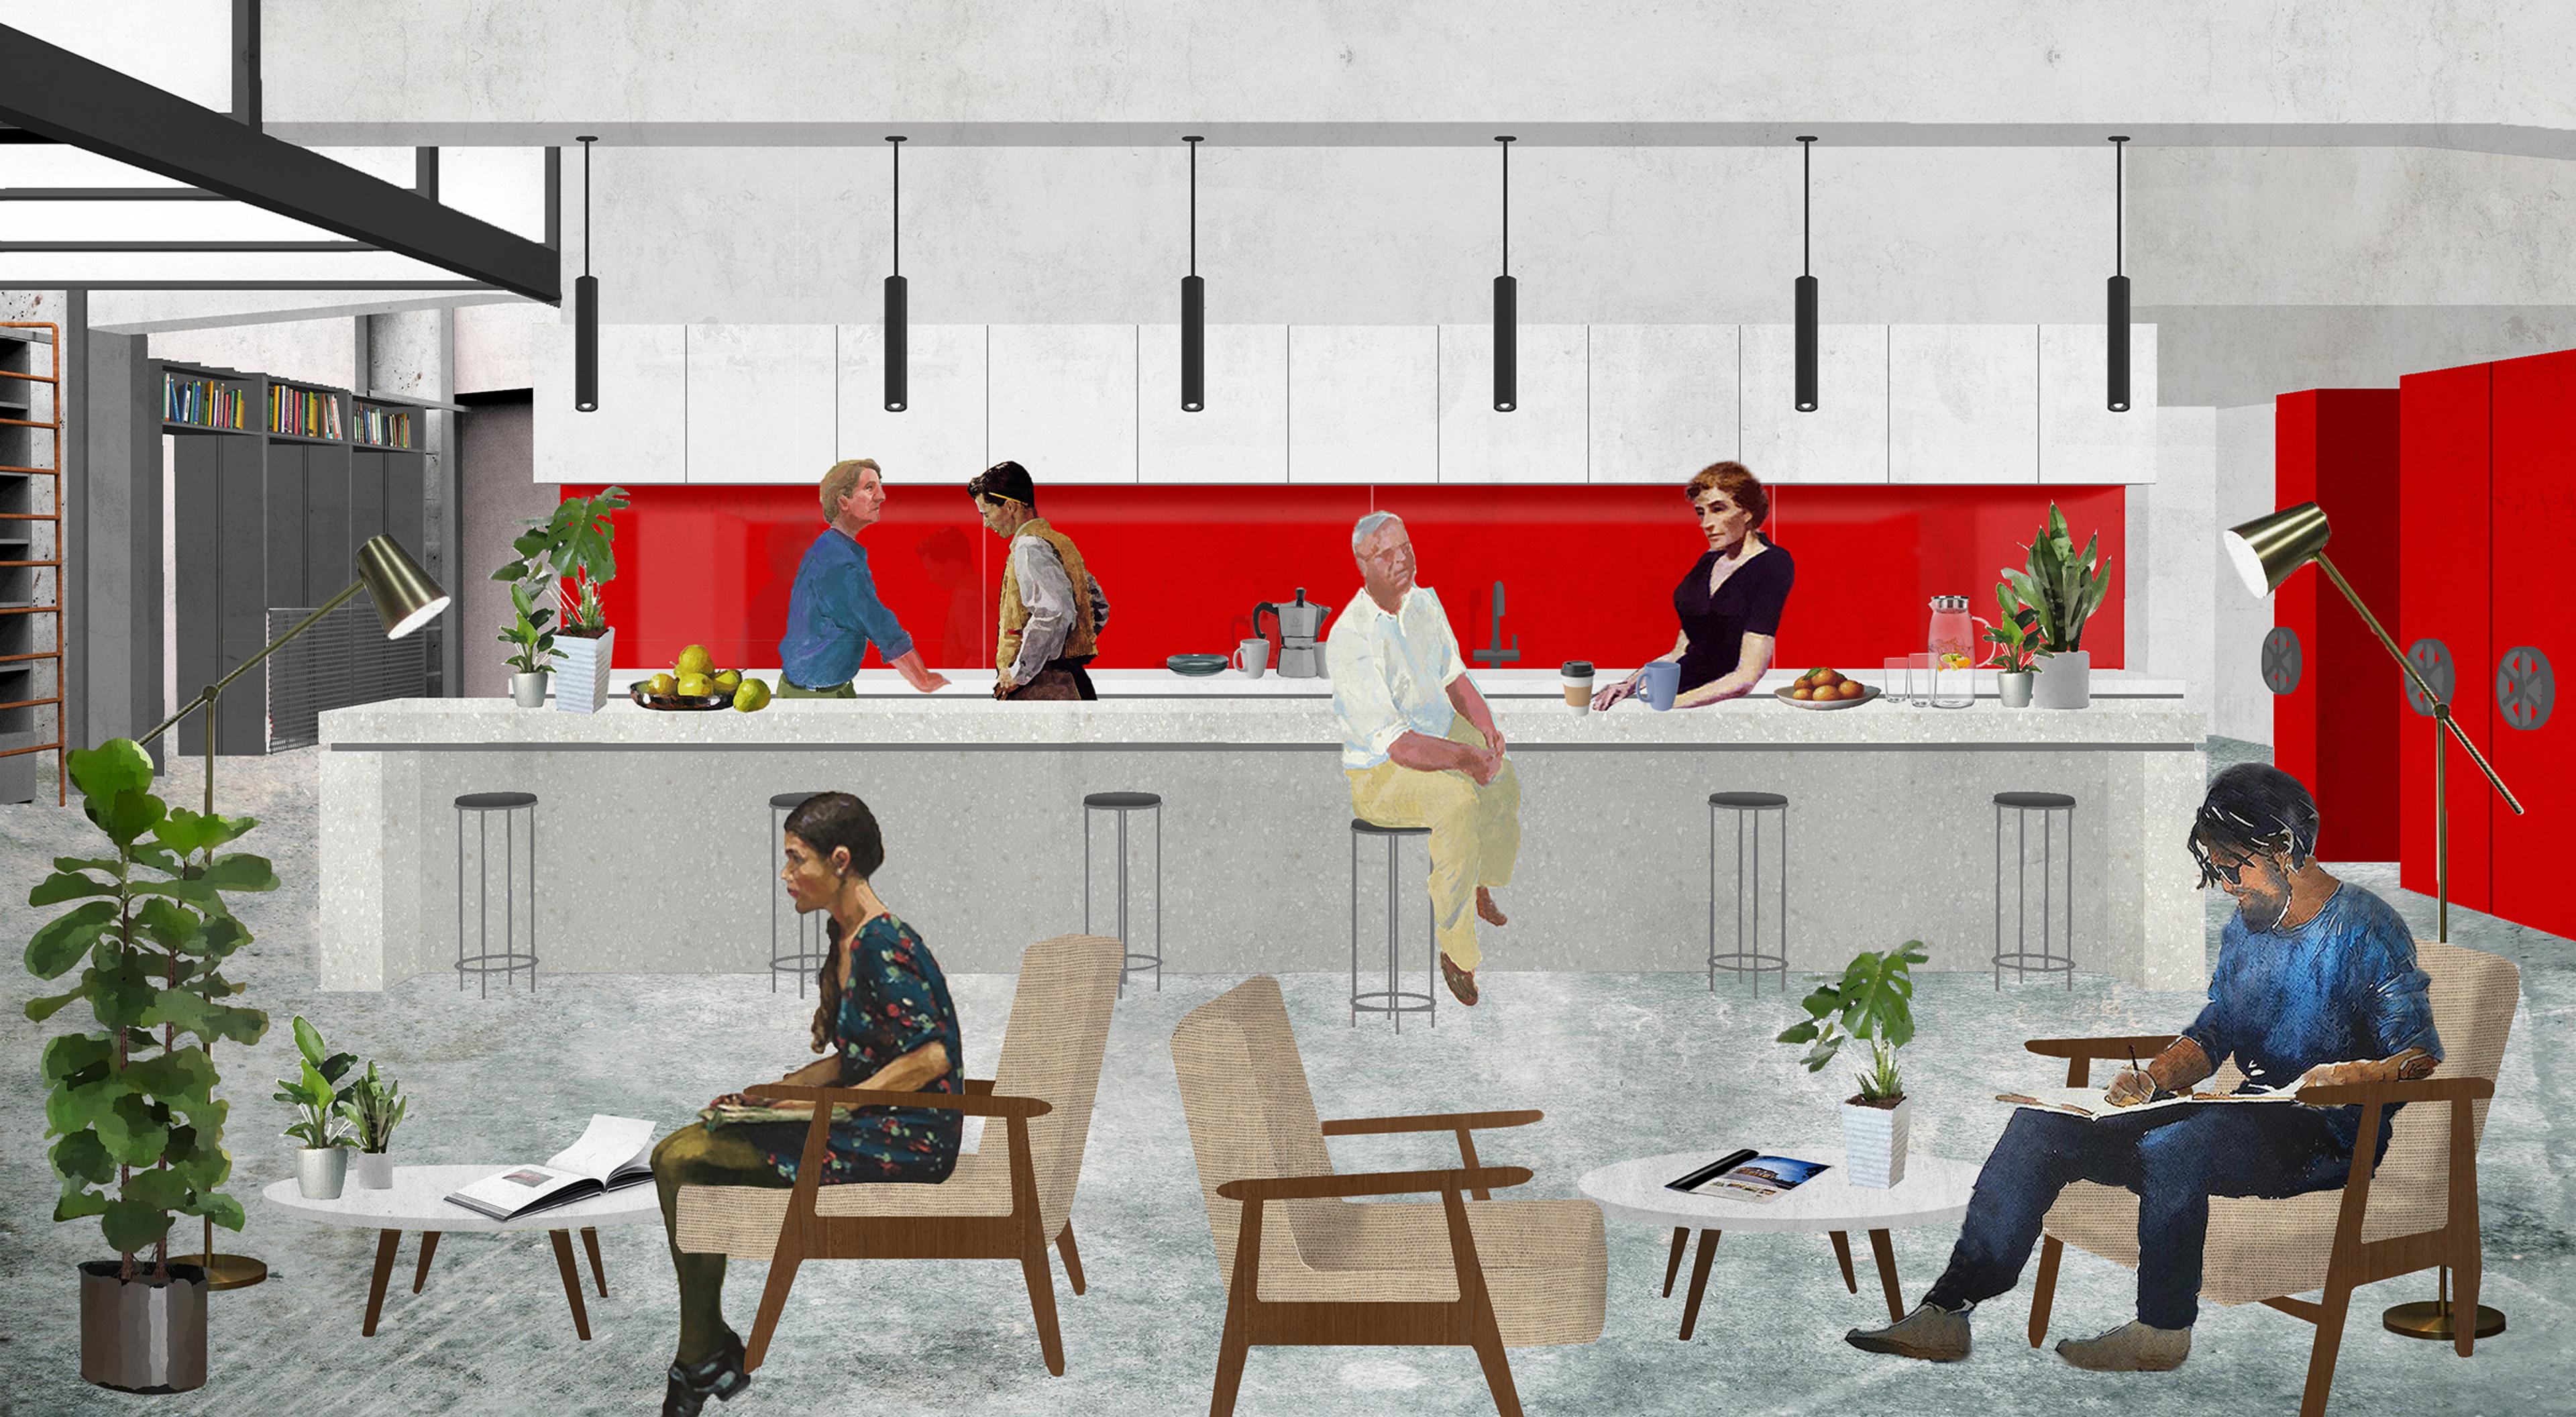 architectural rendering of modern office with bar and people